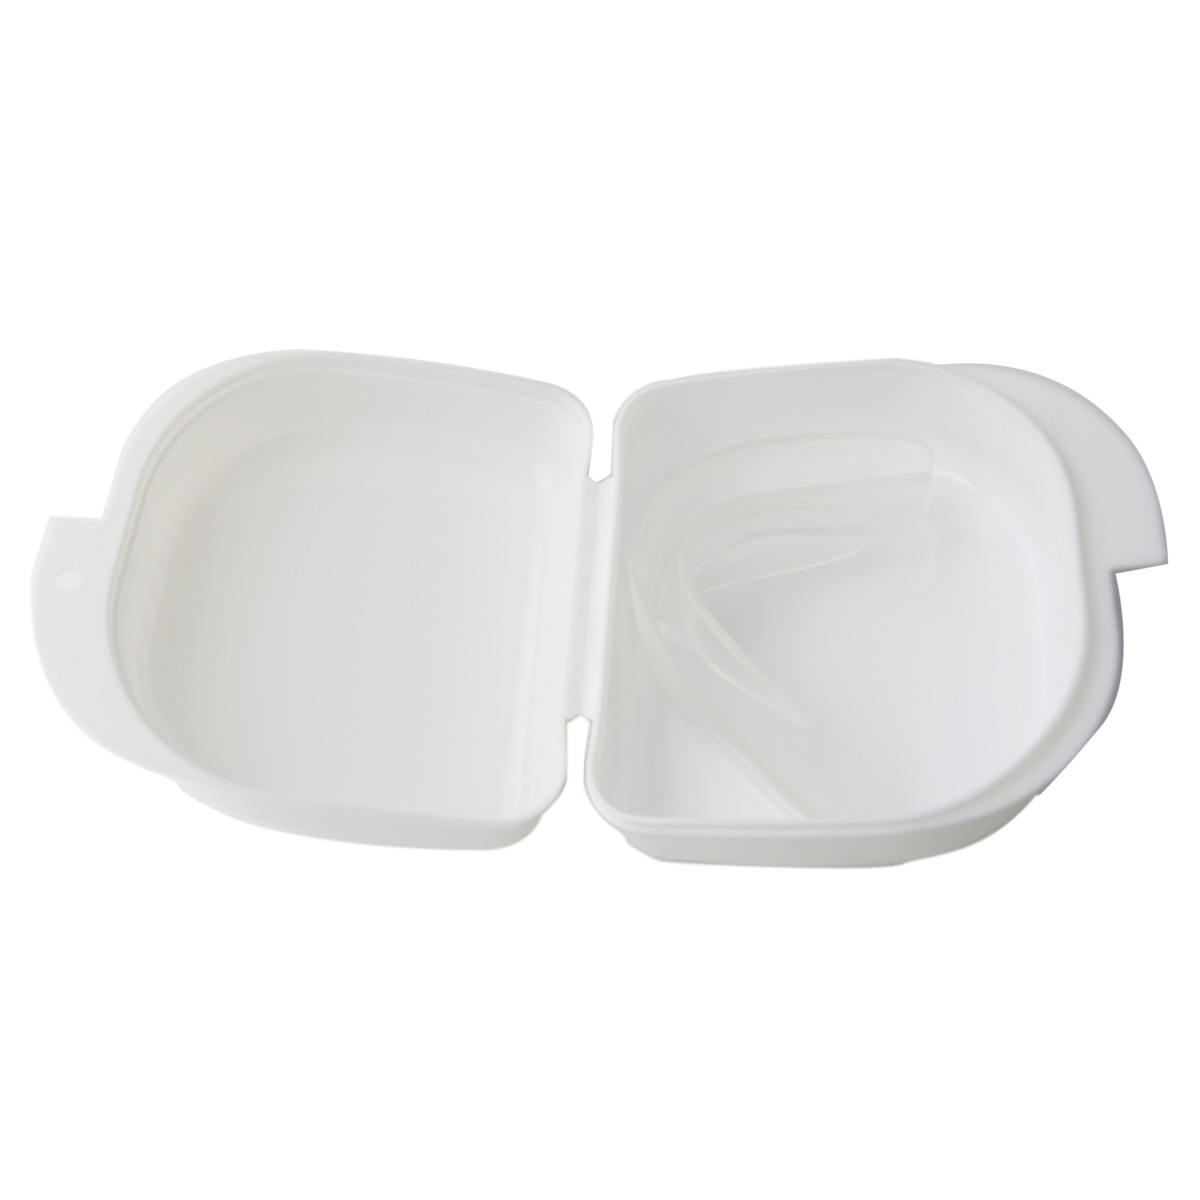 Grin365 Thermoplastic Custom Dual Arch Mouth Tray